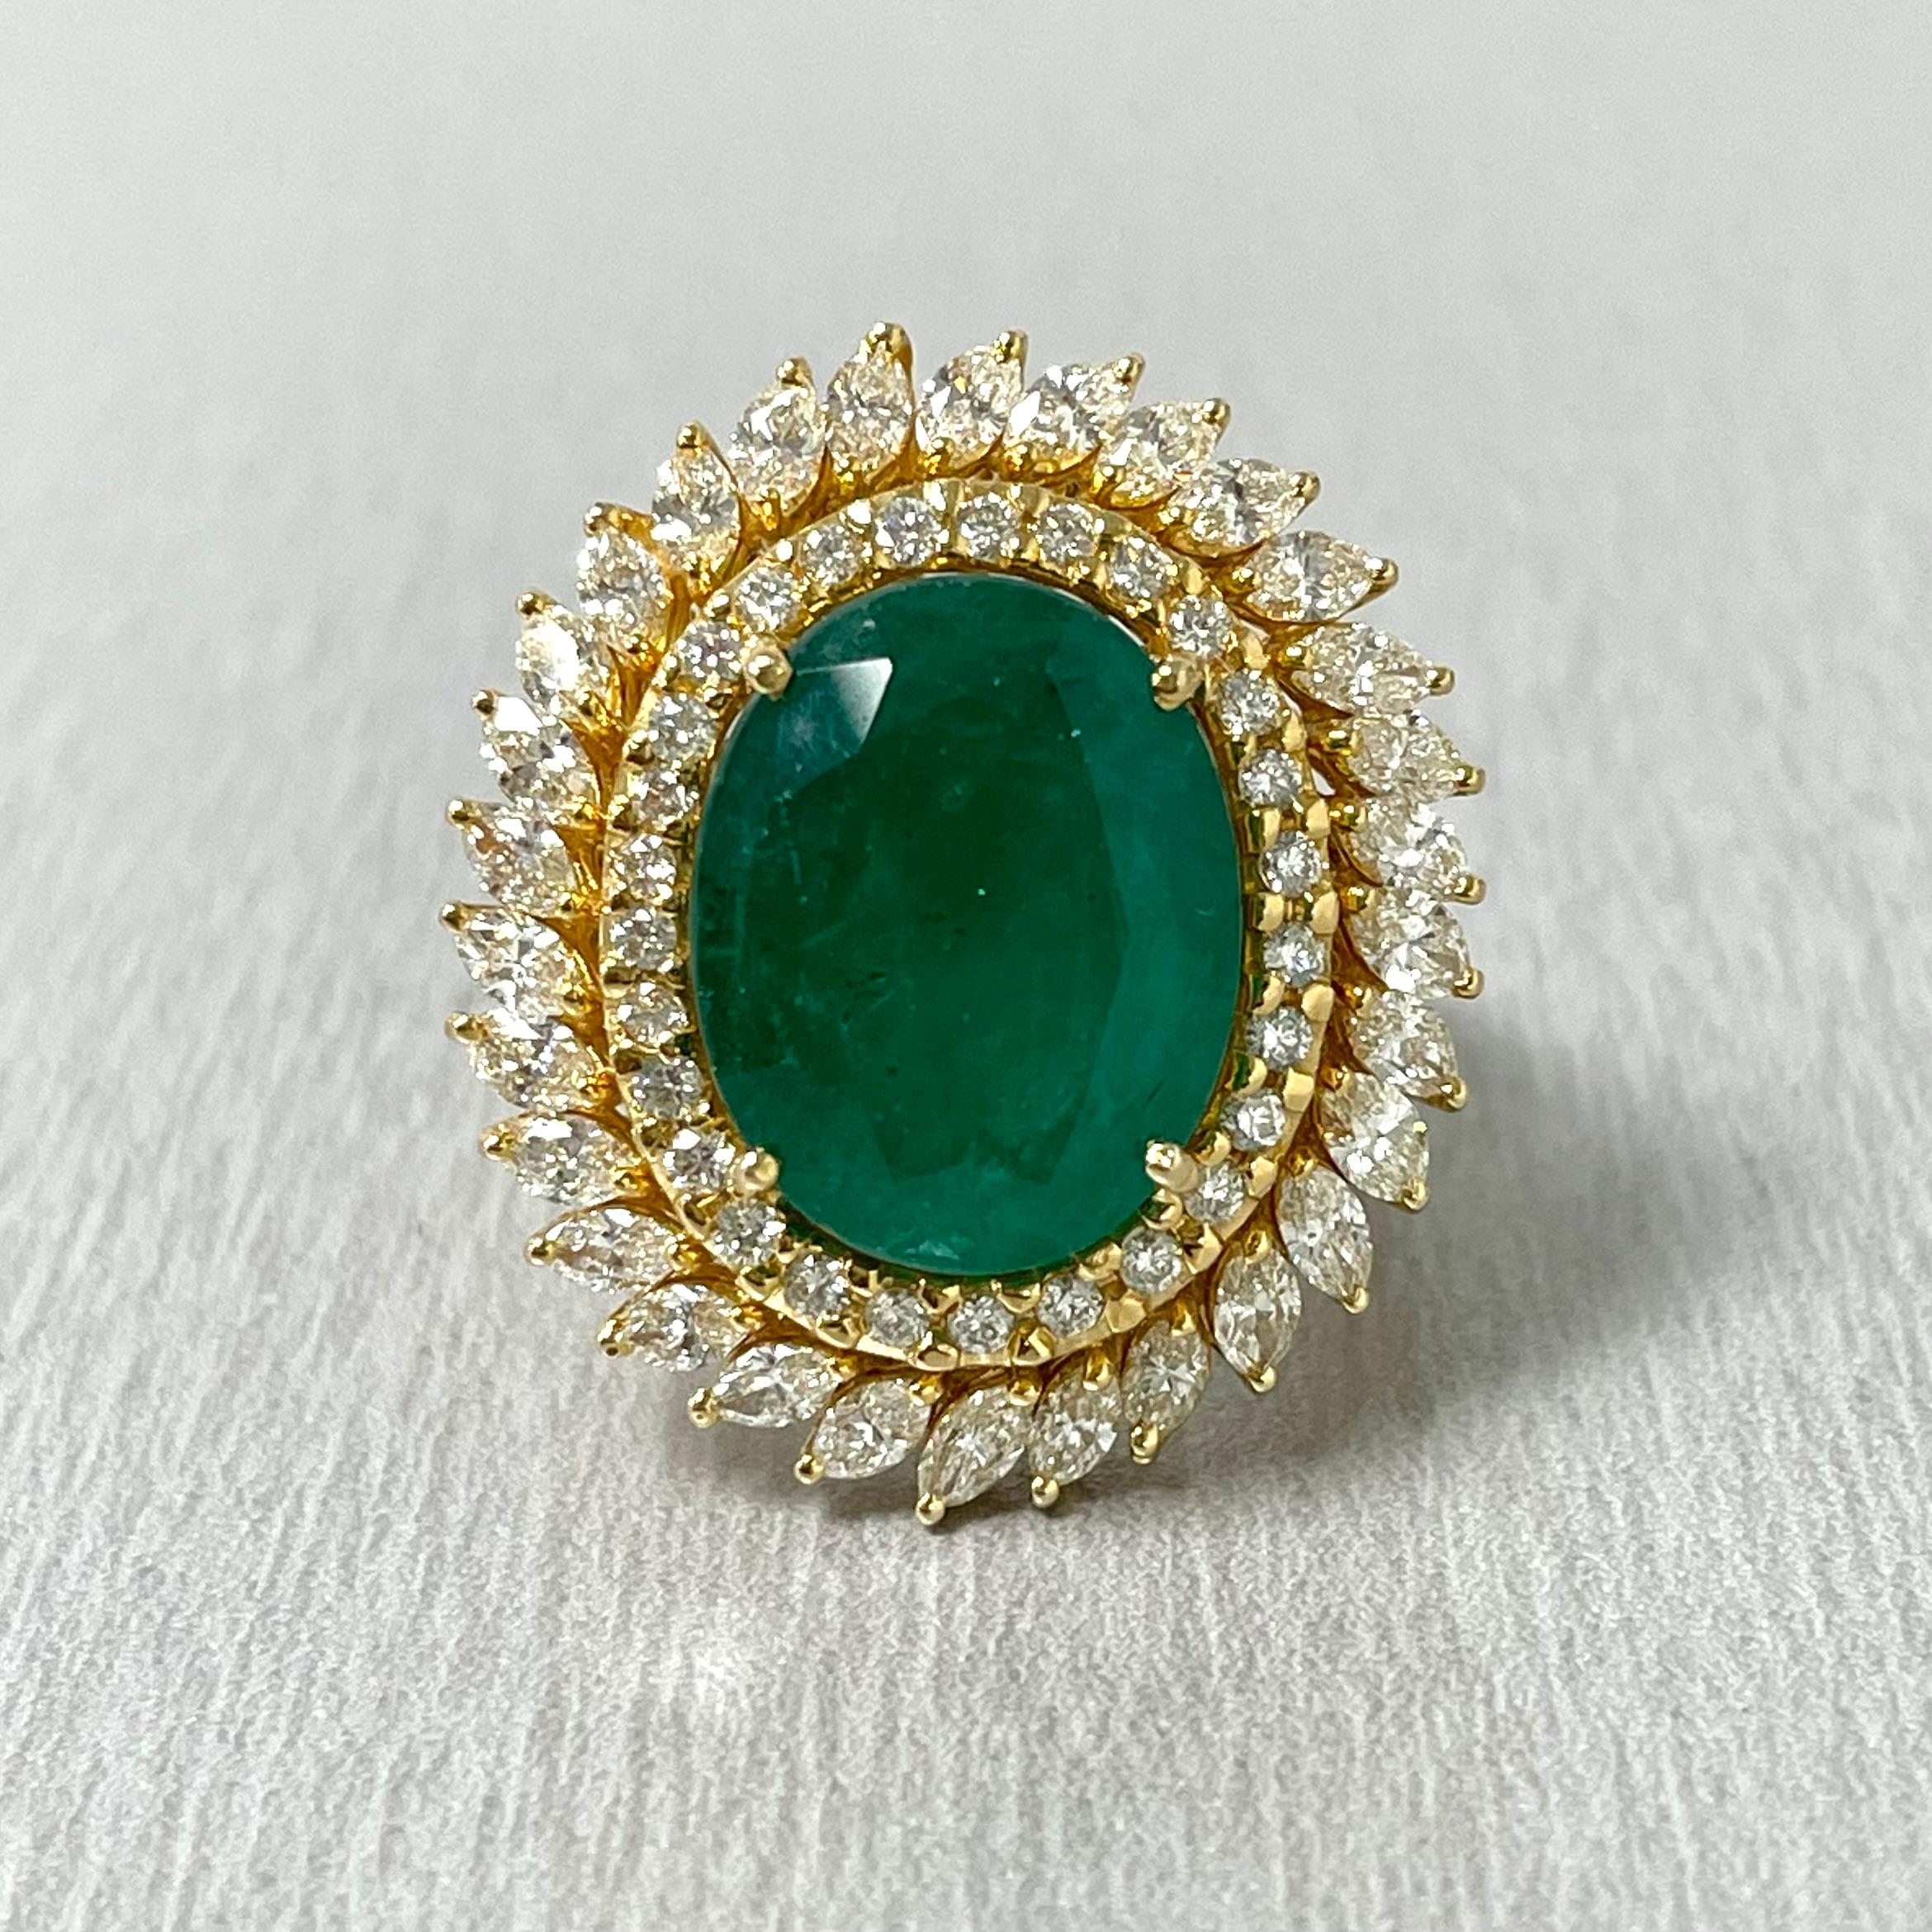 Contemporary Beauvince Shanaya Emerald & Diamond Cocktail Ring '8.40 ct Emerald' in Gold